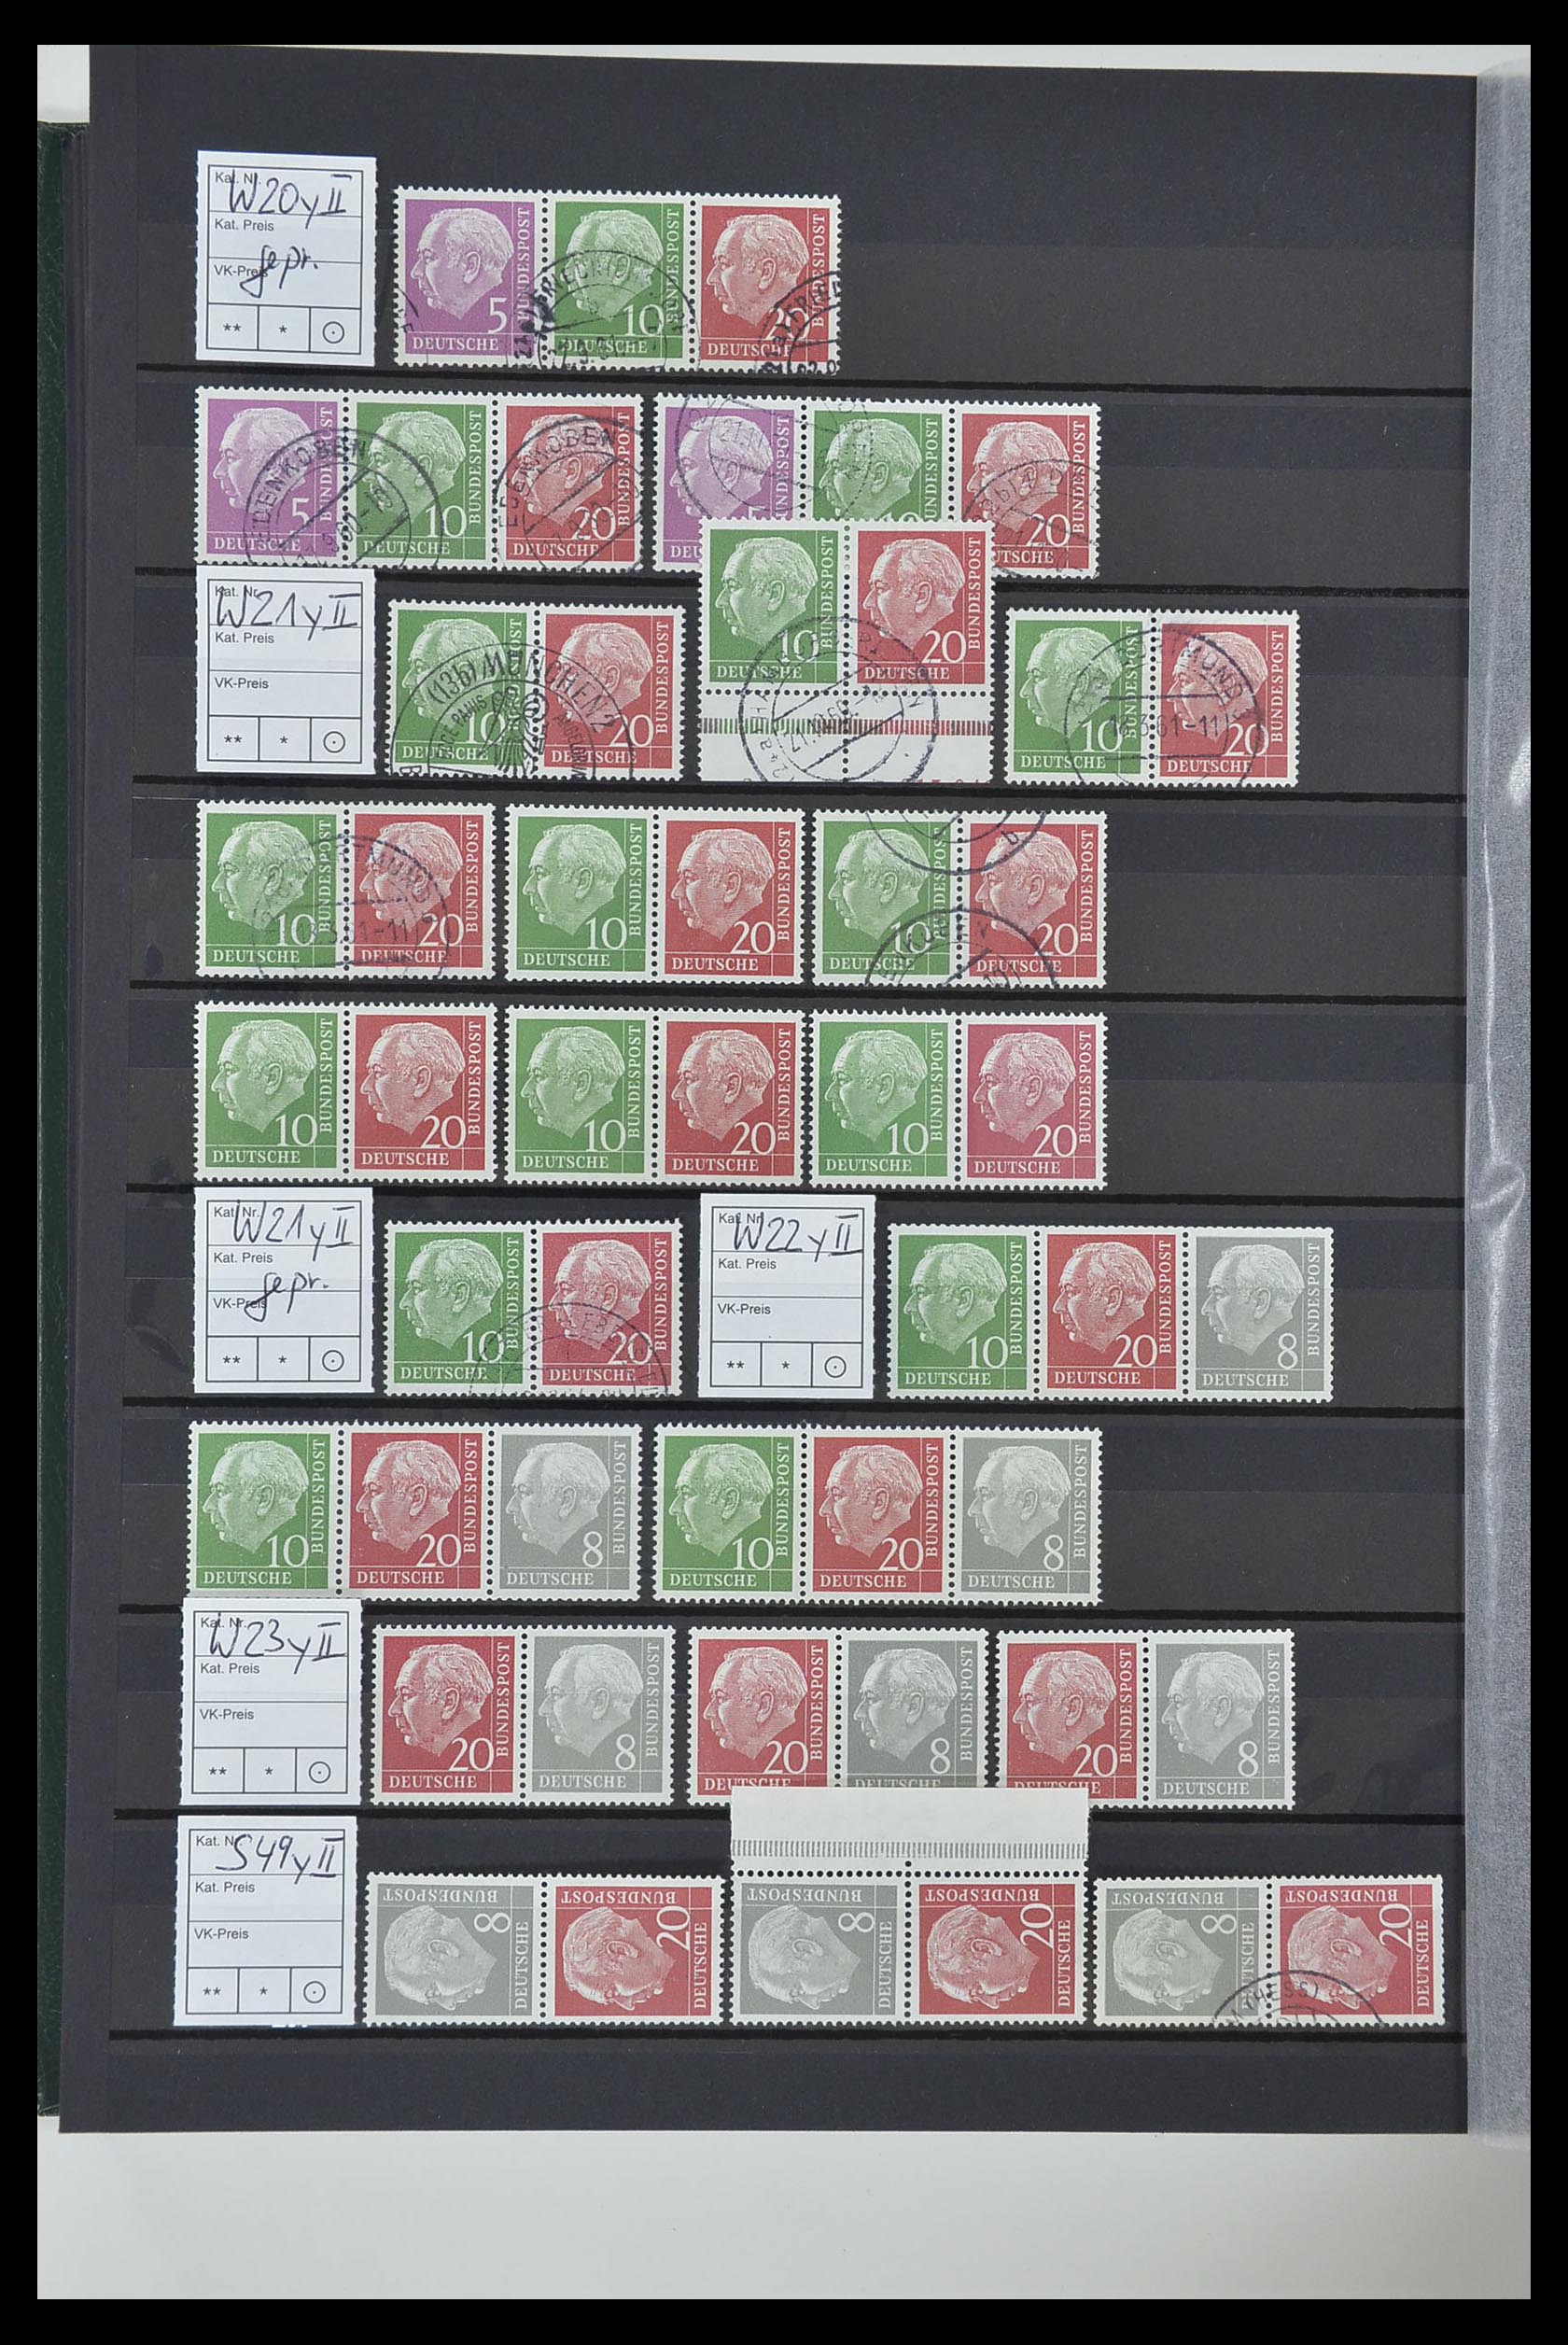 33275 030 - Stamp collection 33275 Bundespost combinations 1951-1960.